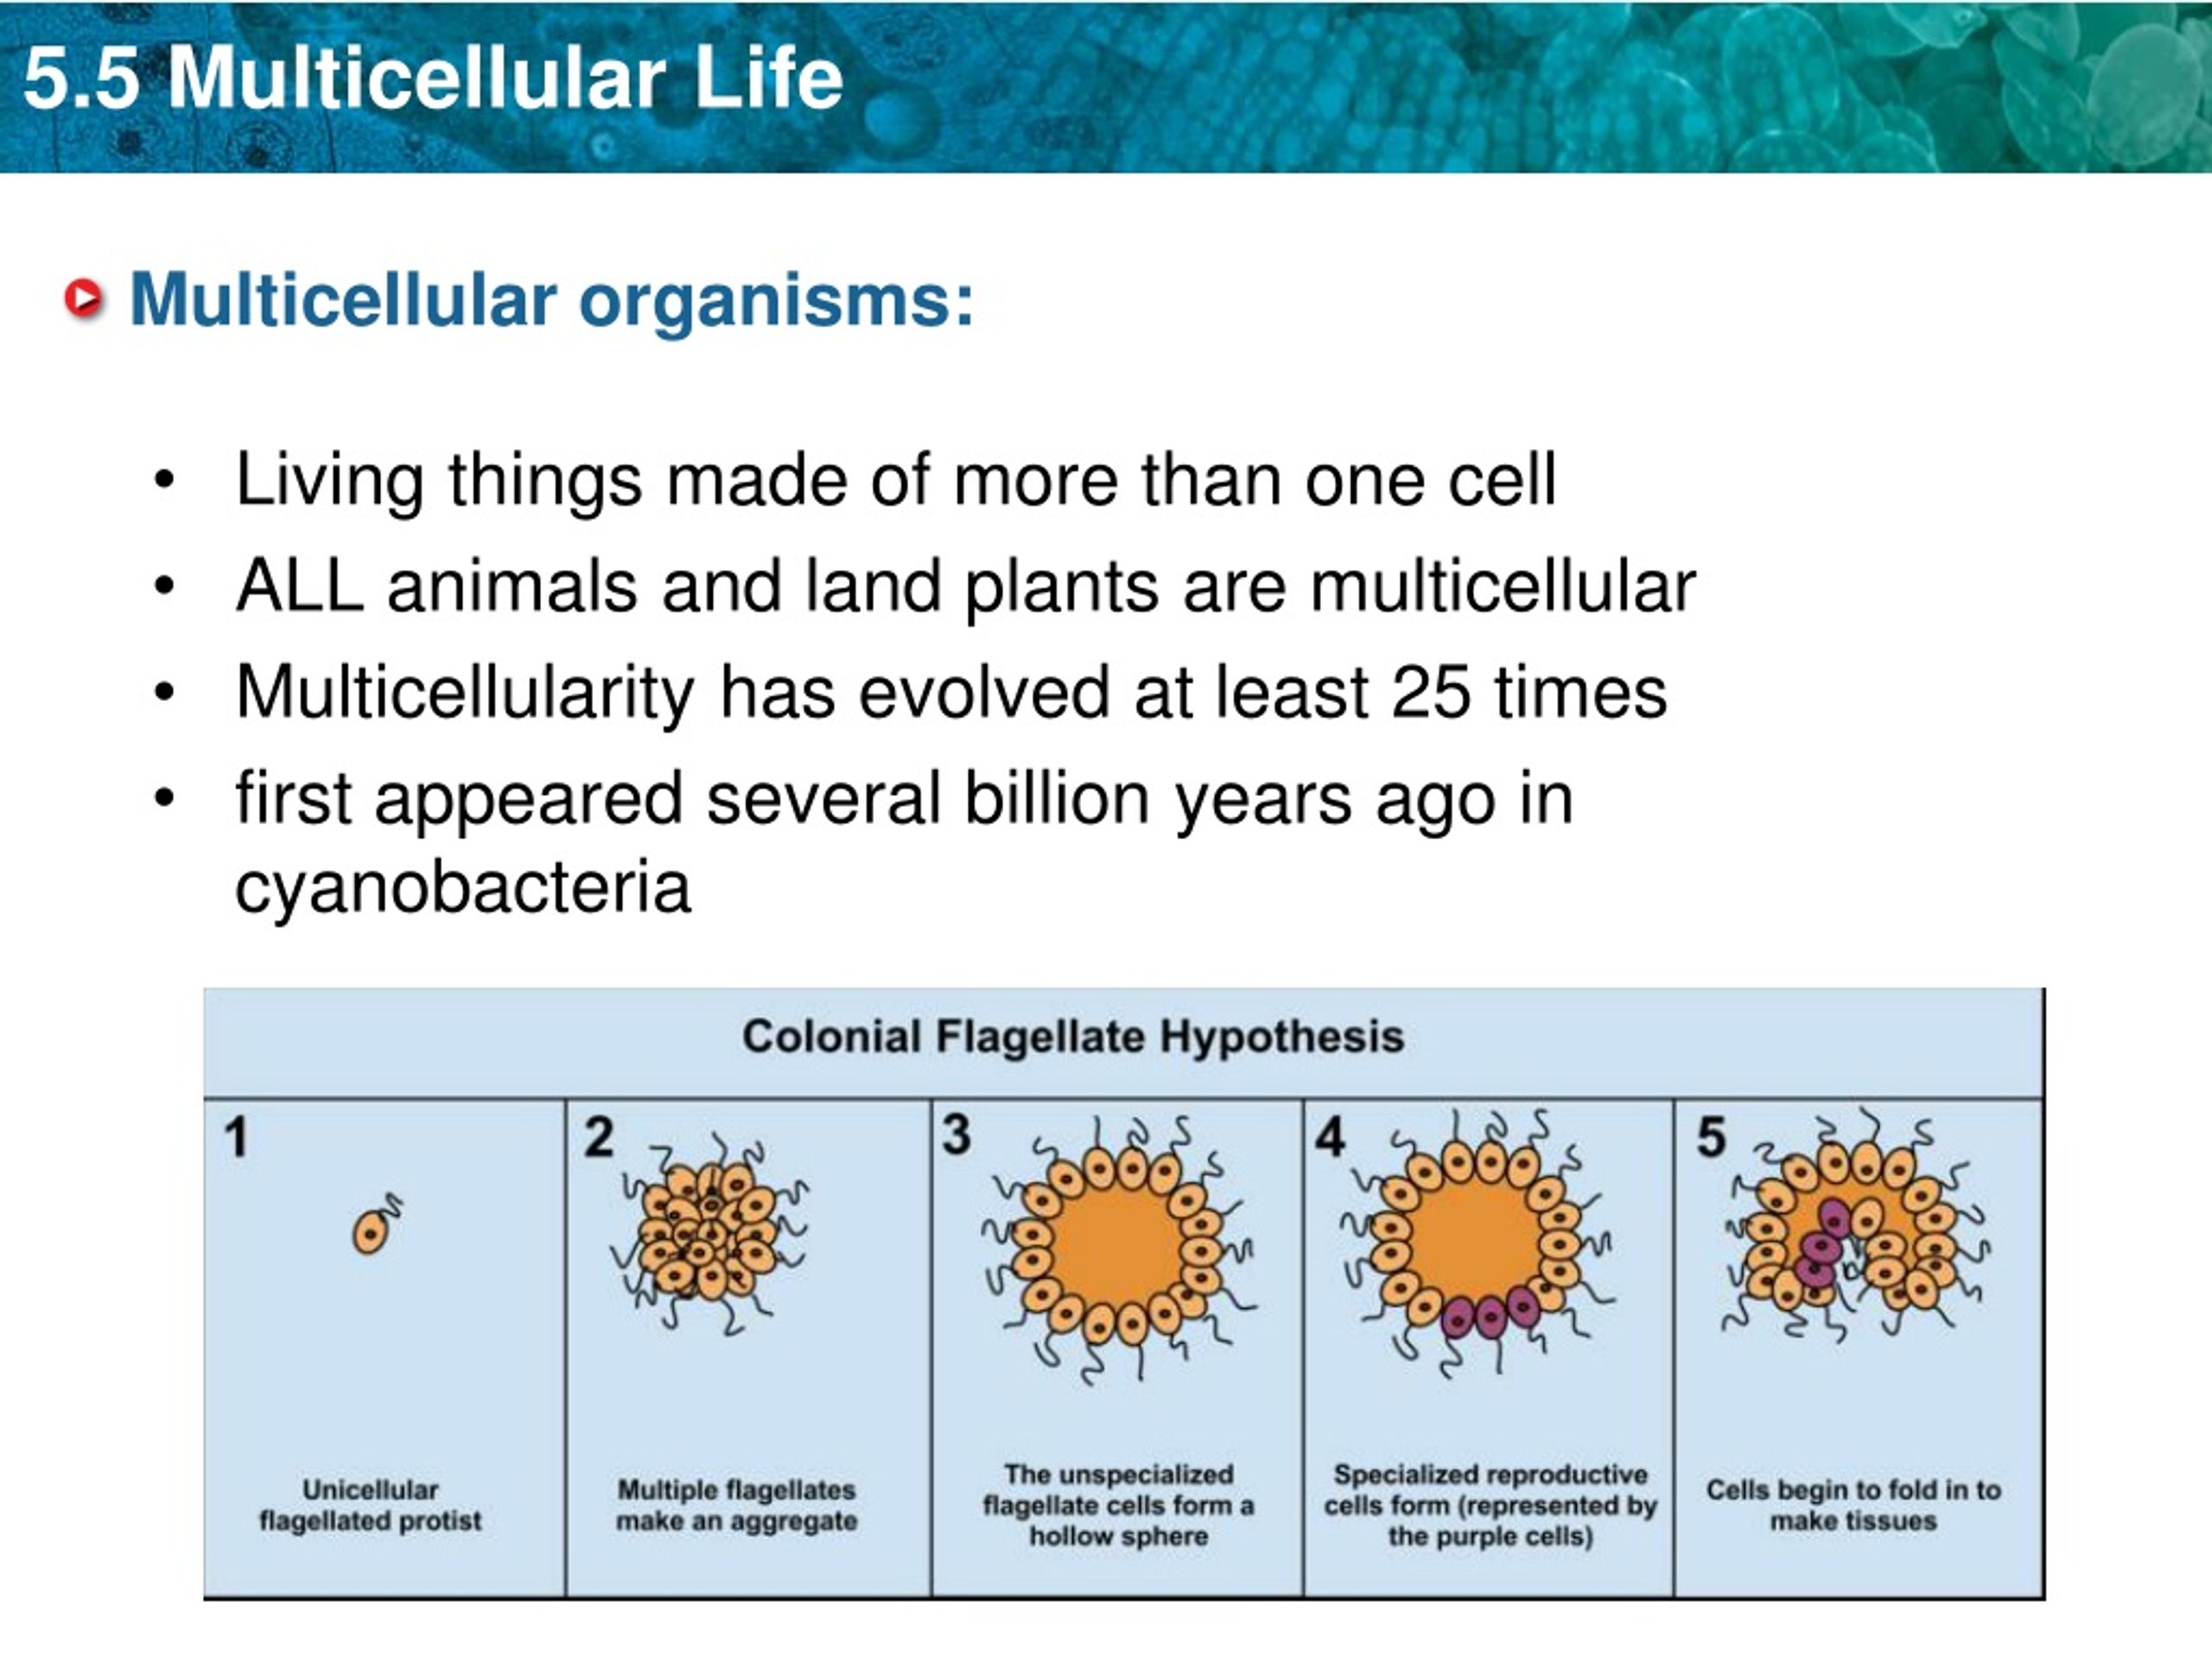 kai is developing a multimedia presentation on multicellular organisms